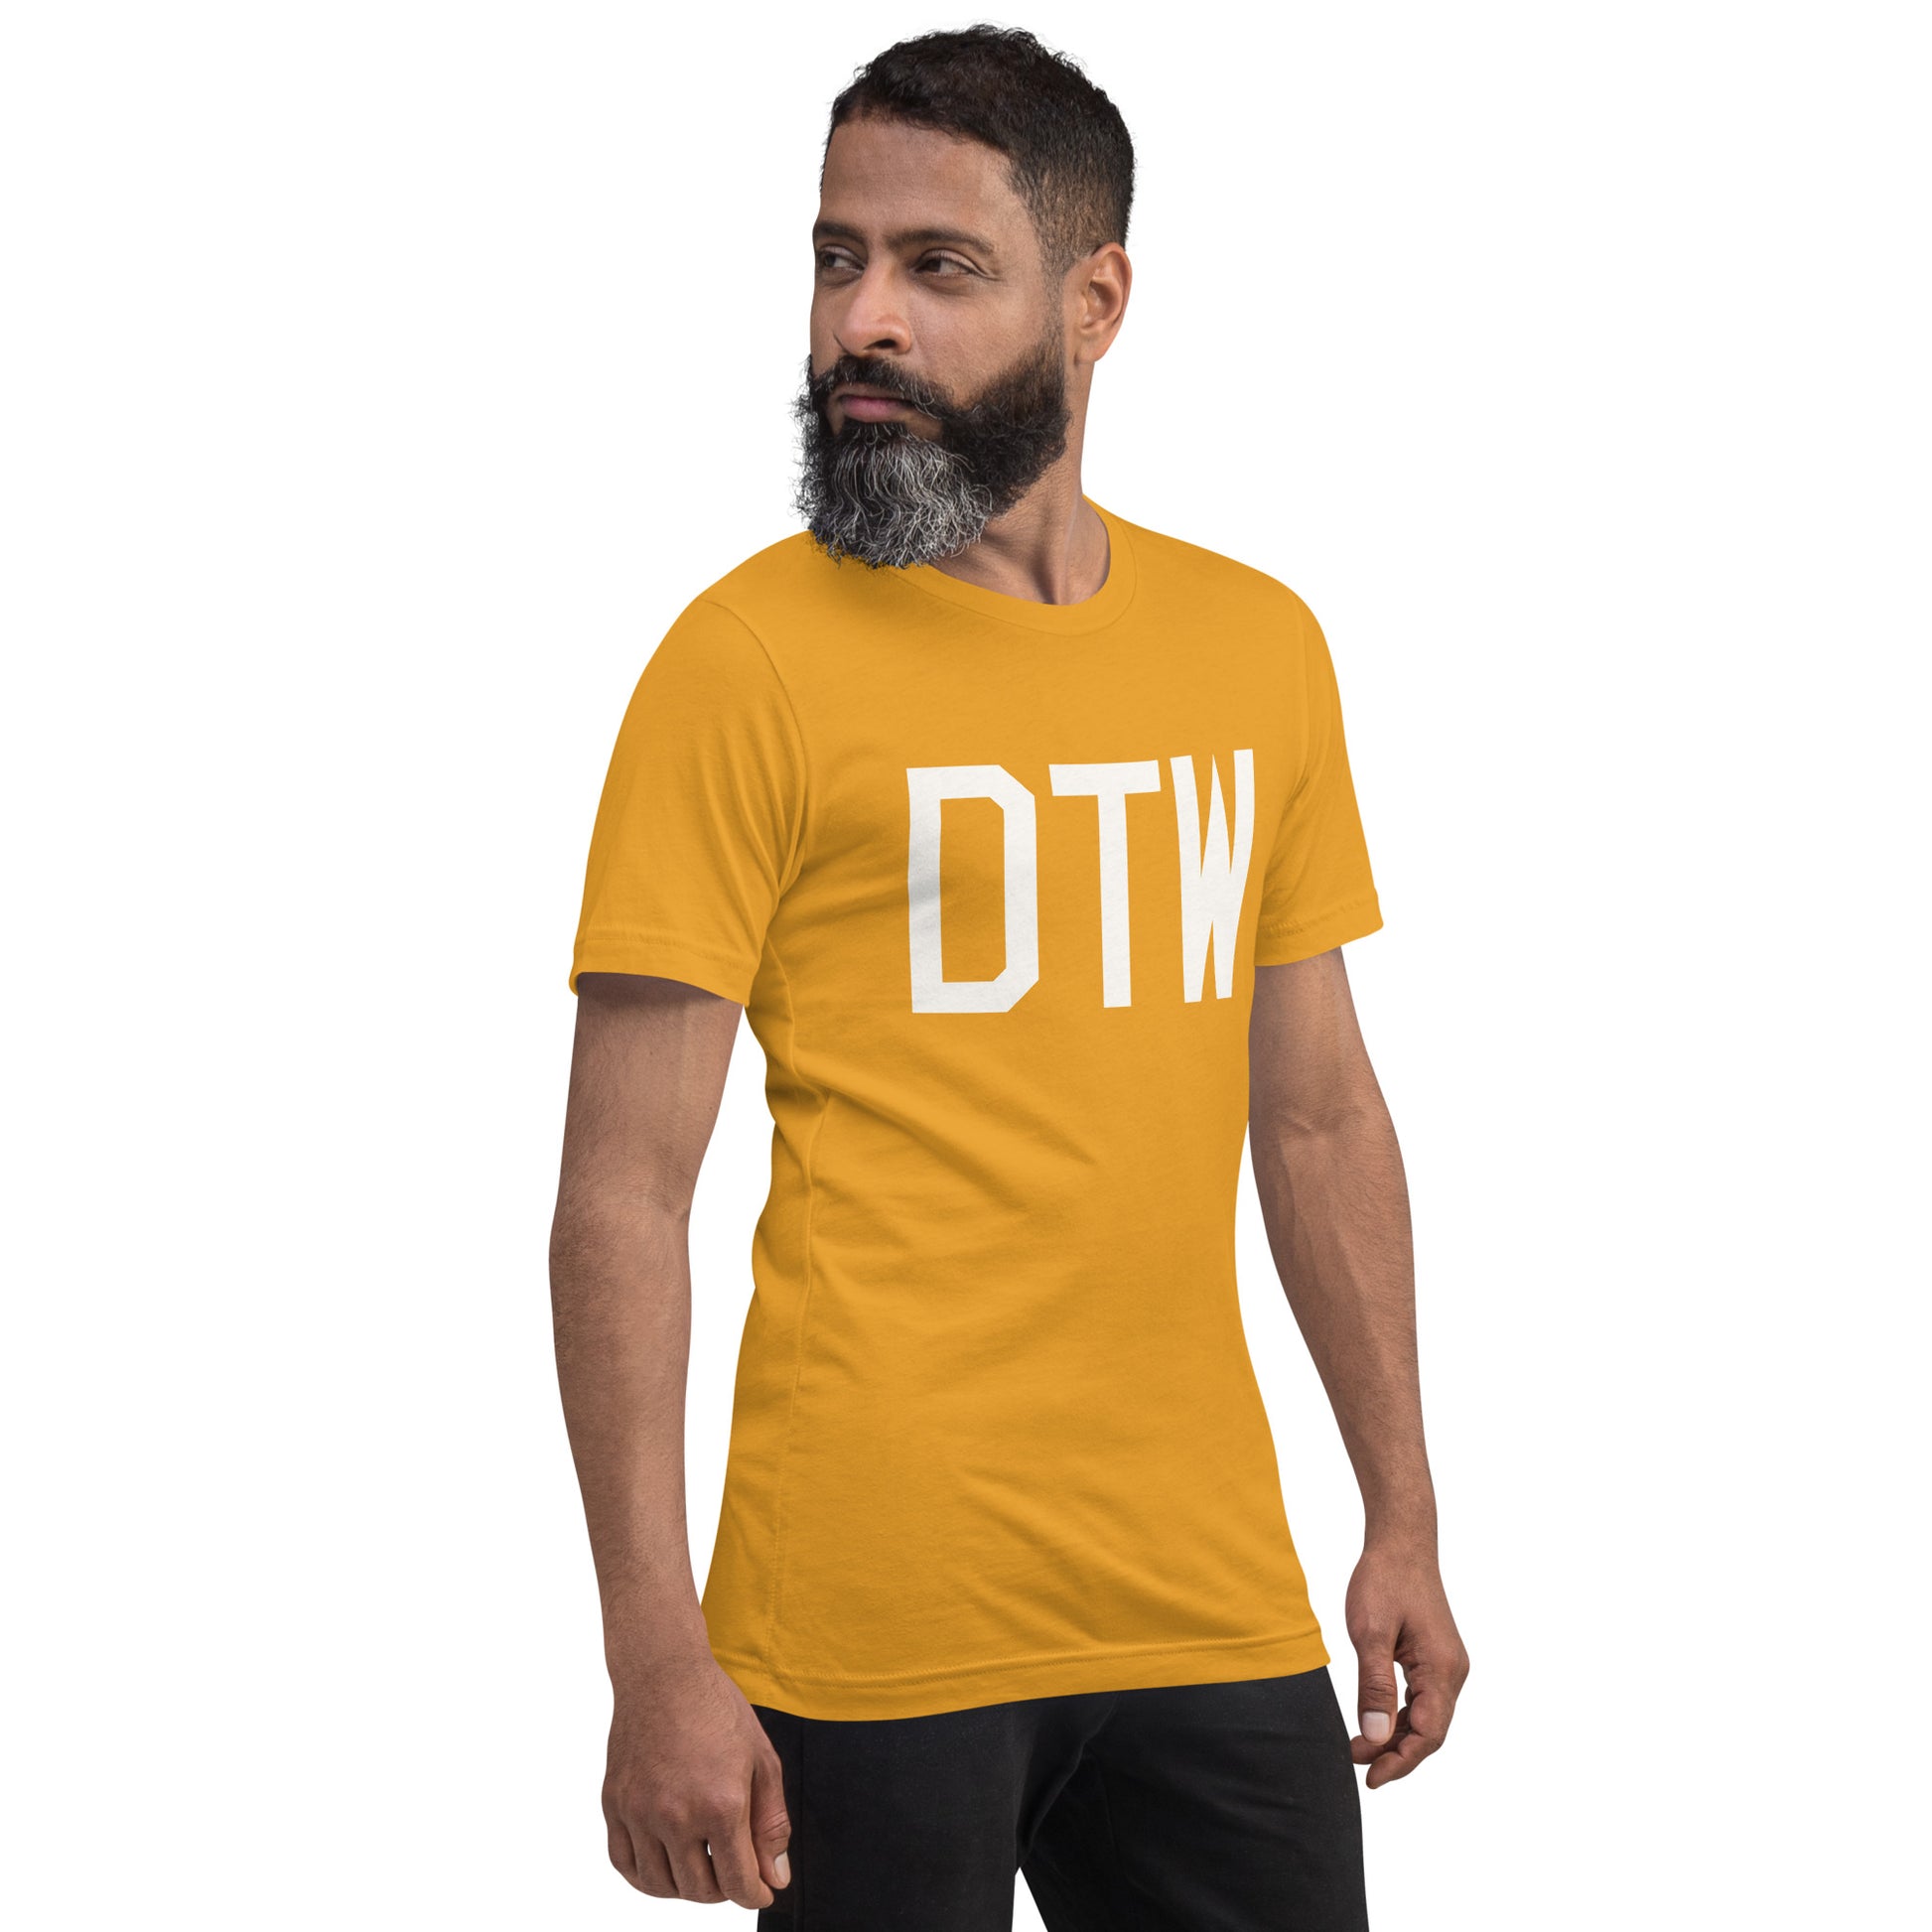 Airport Code T-Shirt - White Graphic • DTW Detroit • YHM Designs - Image 12